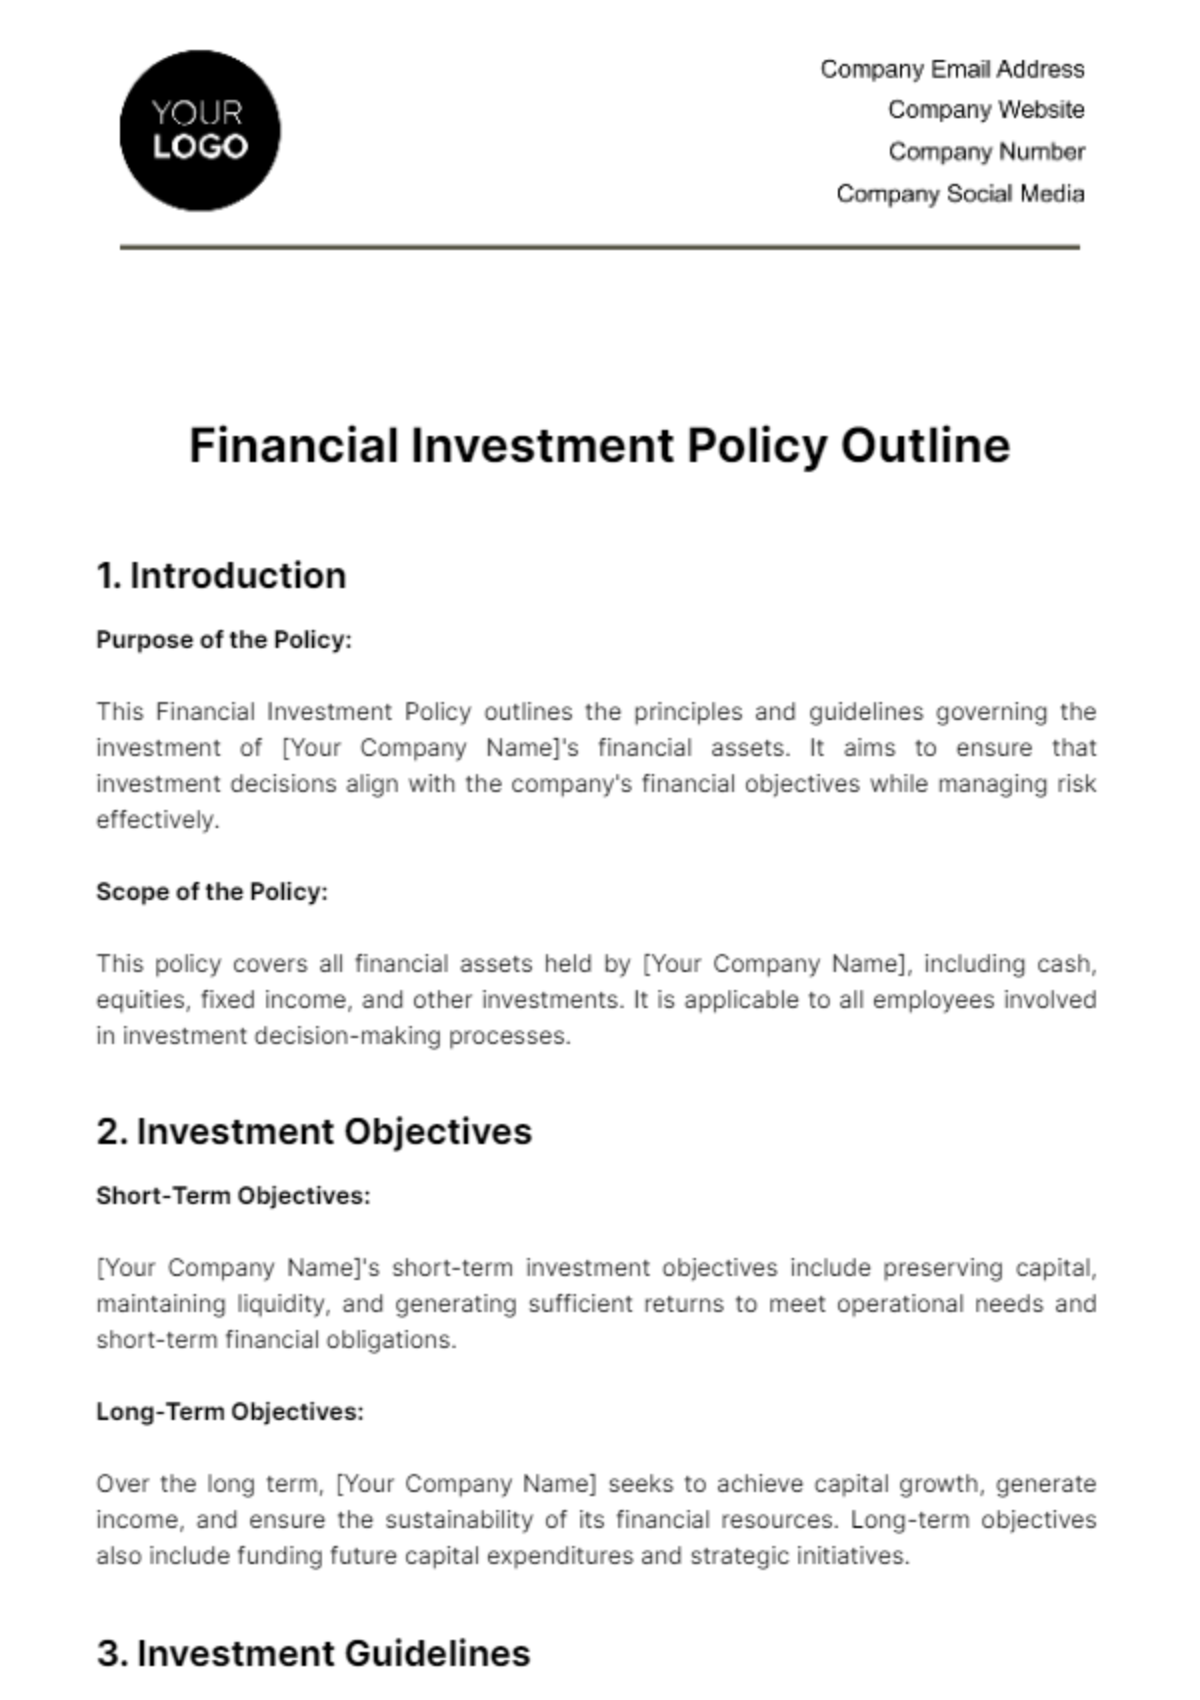 Financial Investment Policy Outline Template